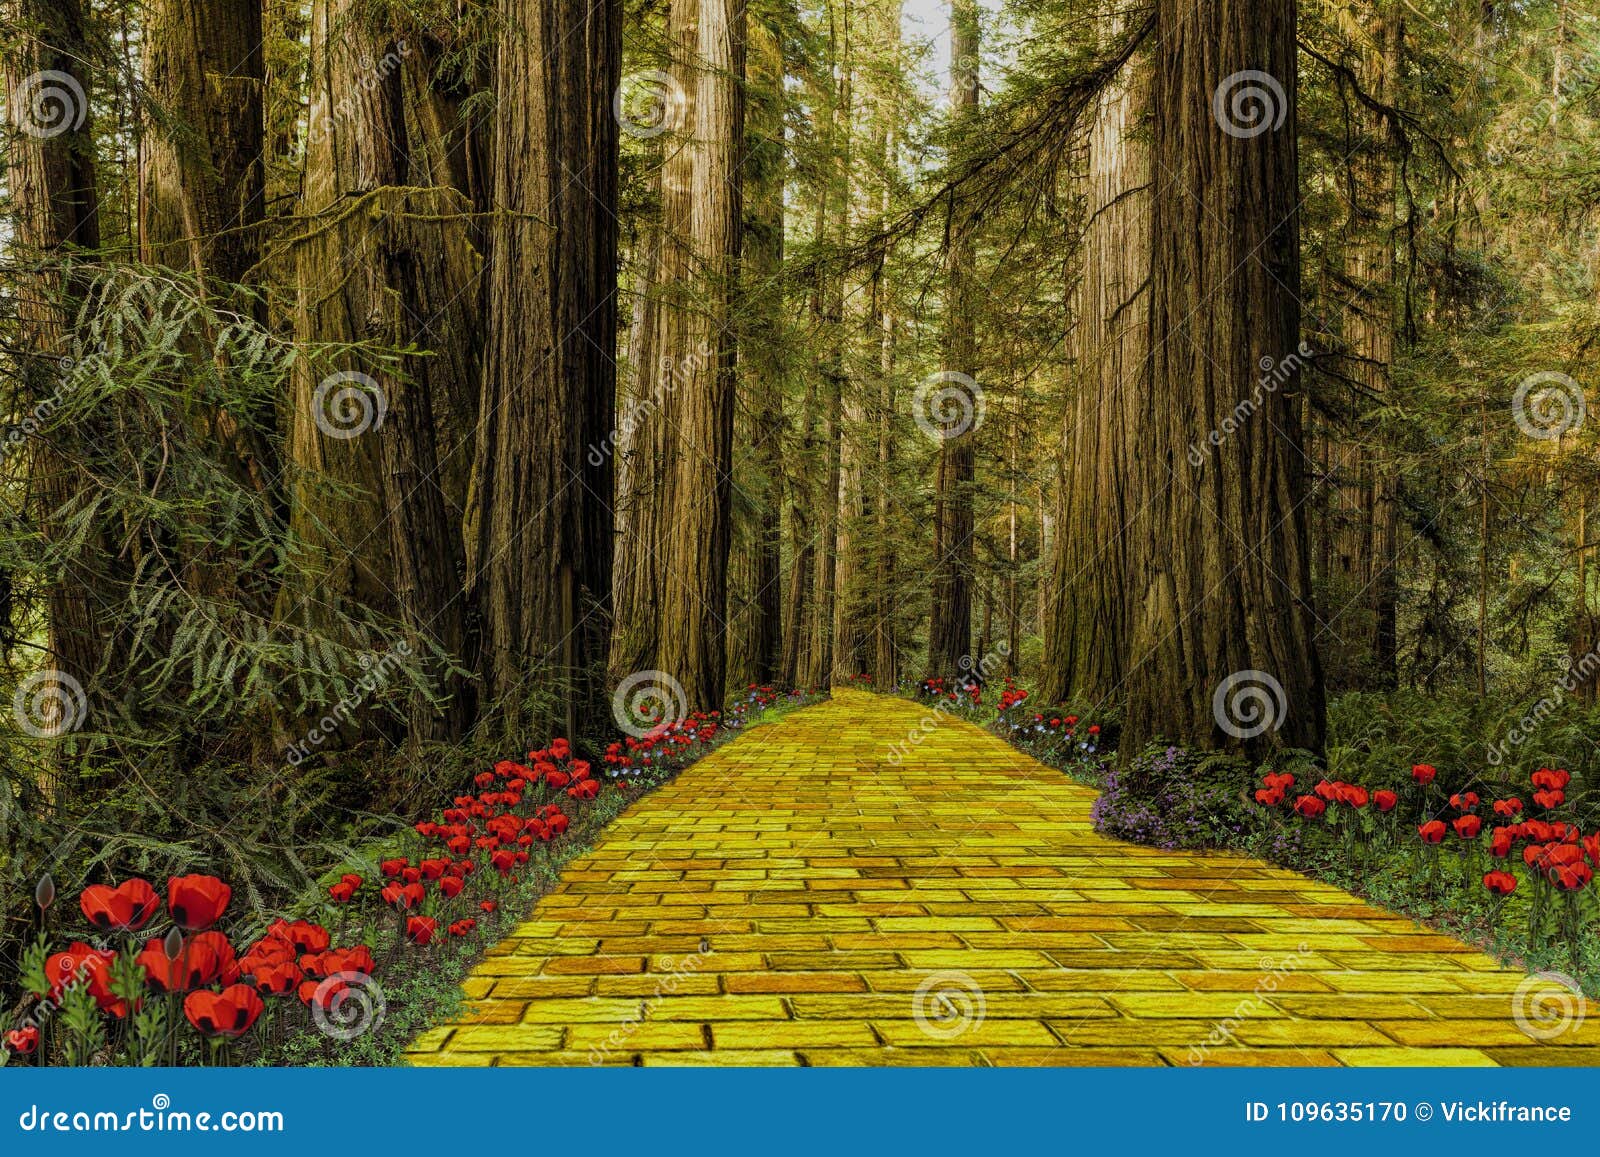 yellow brick road leading through a forest